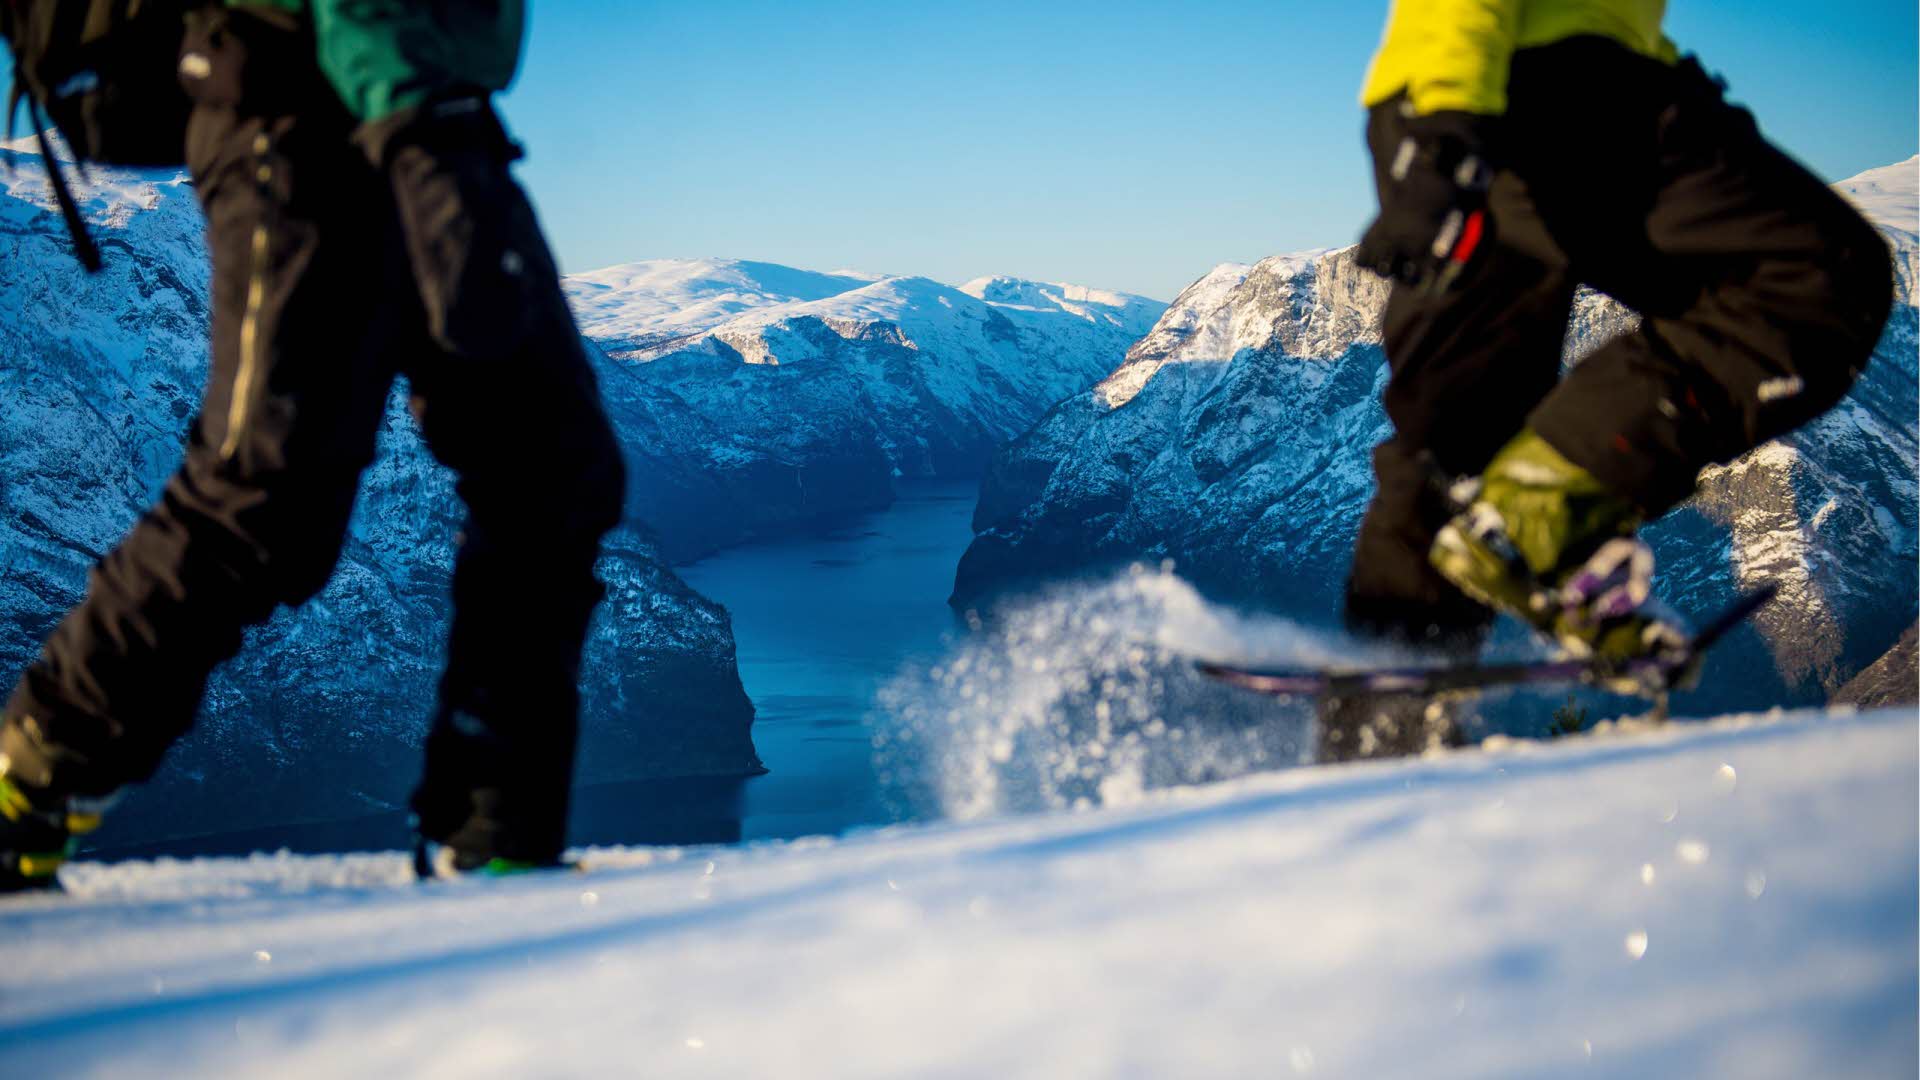 The legs of two people snowshoeing above the Aurlandsfjord